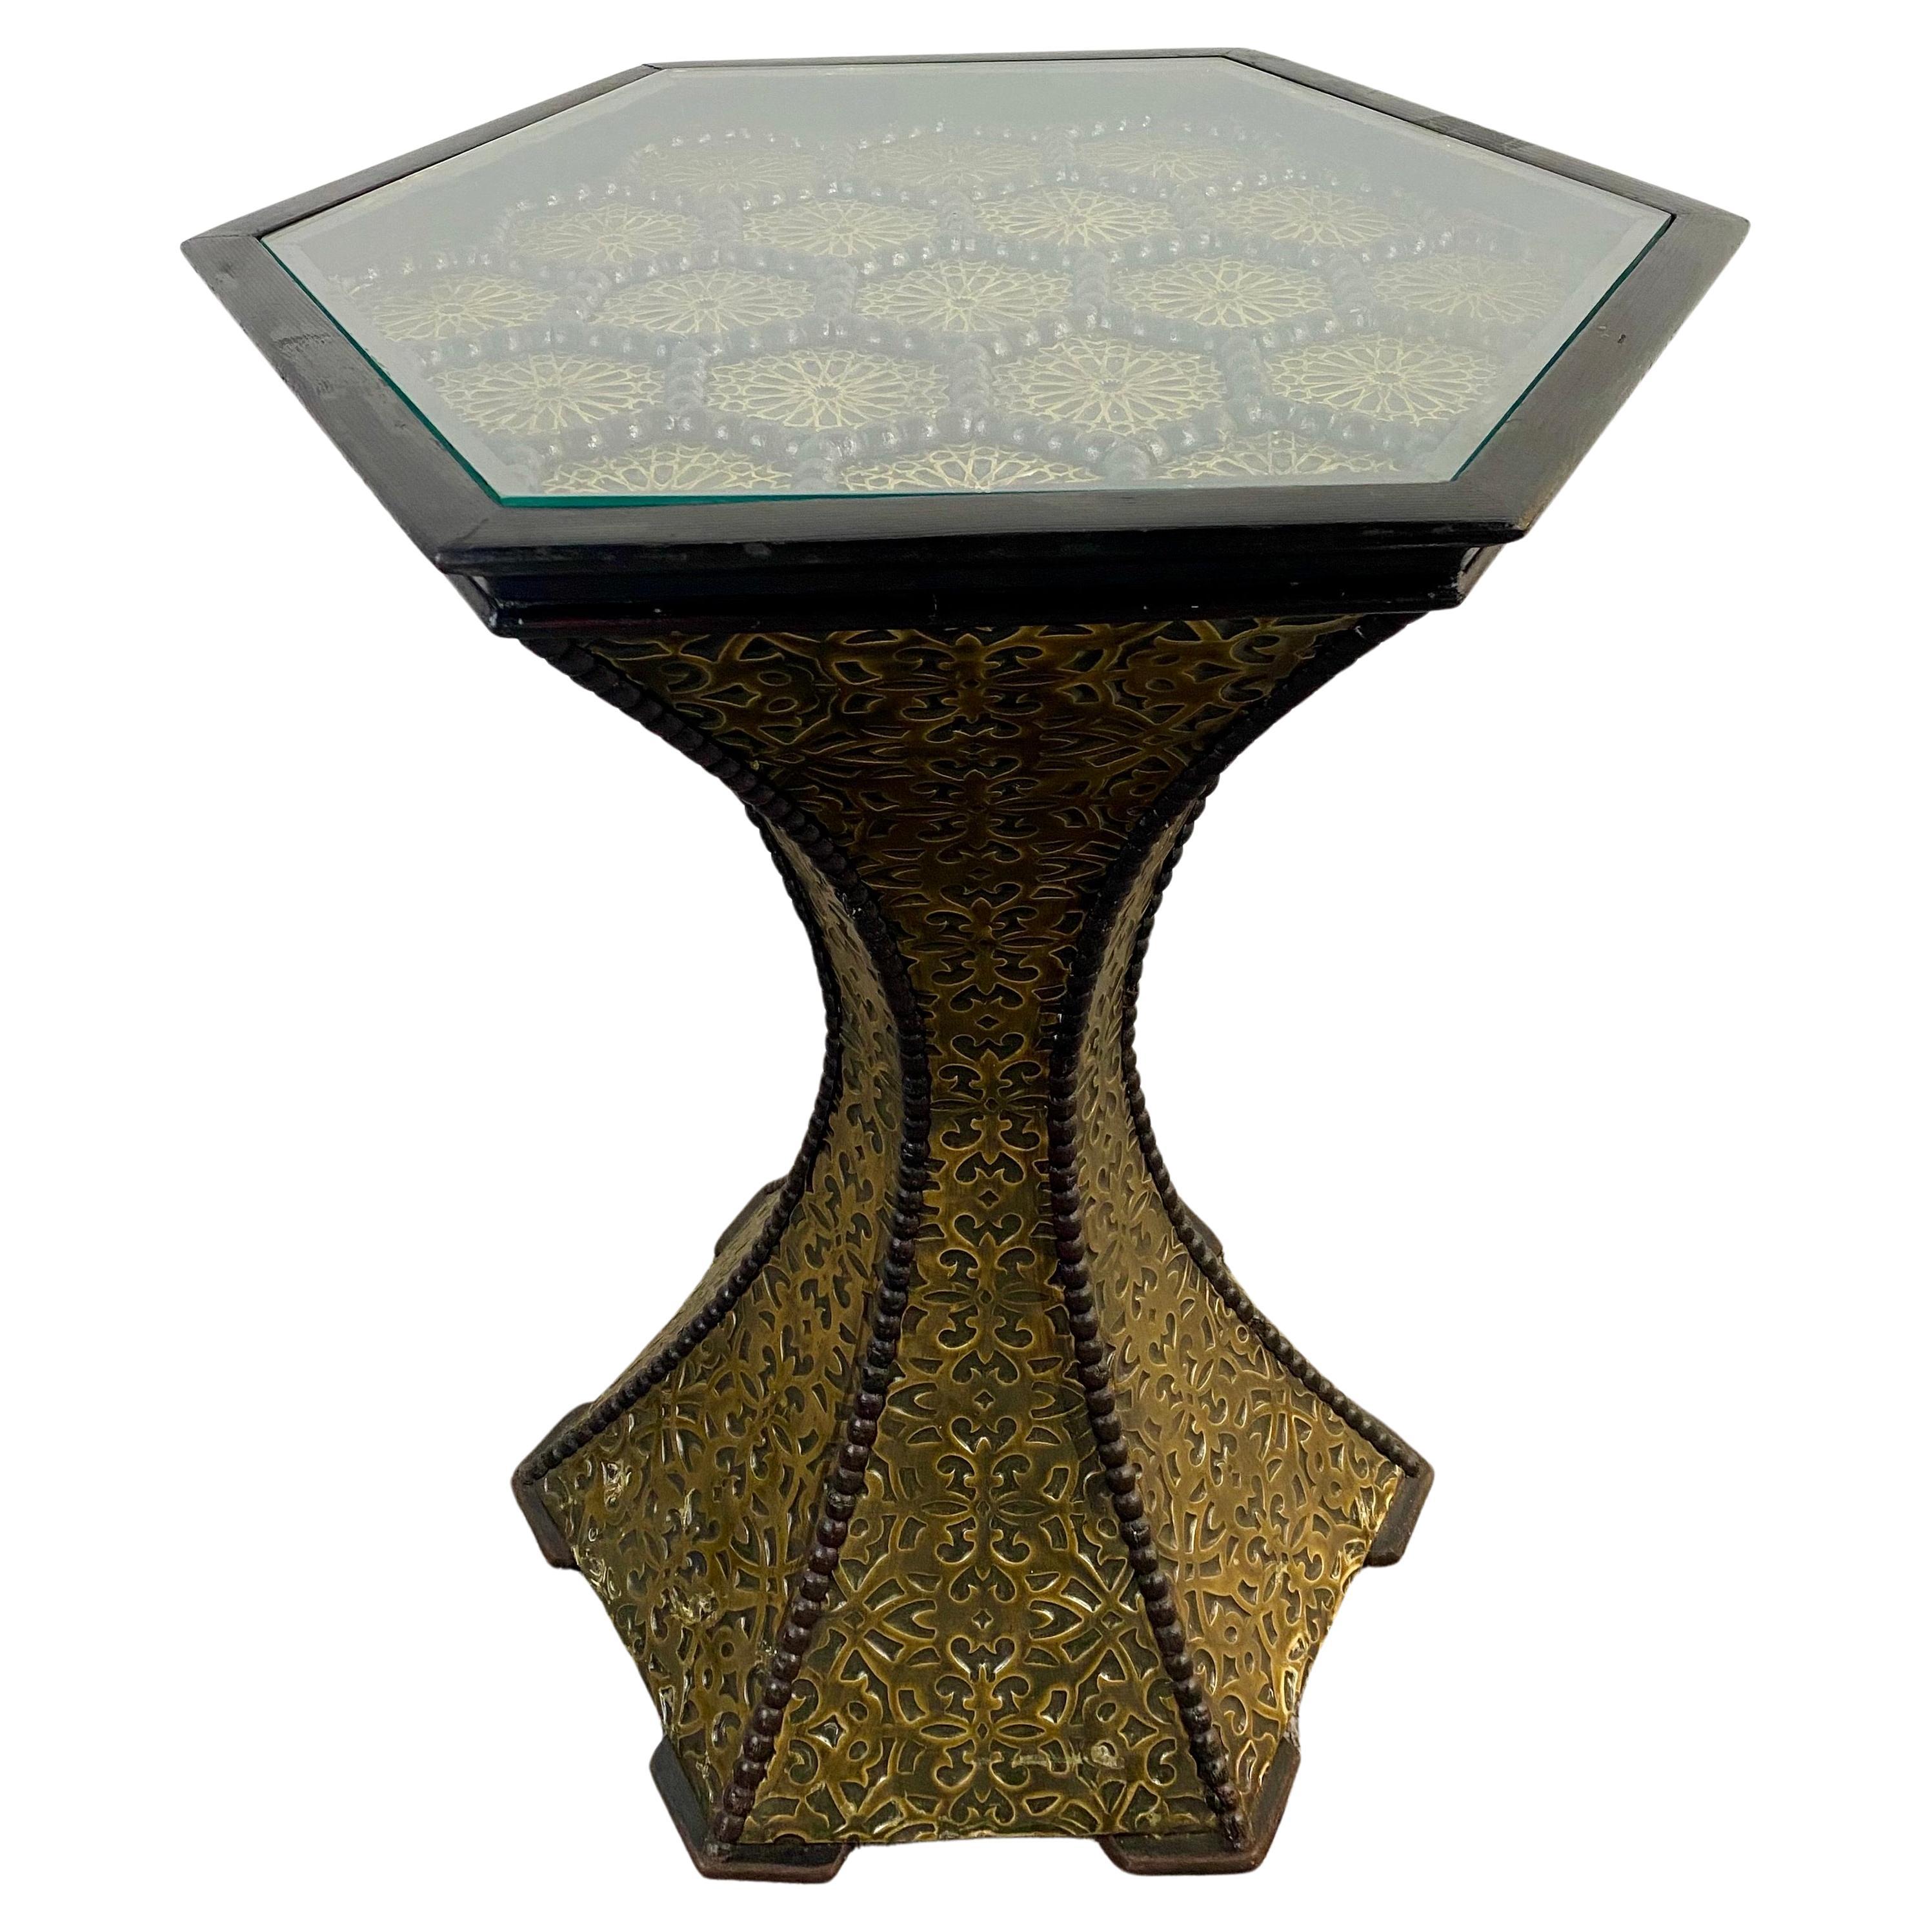 A majestic pair of Hollywood Regency style end or side tables in black ebony ornate with exceptionally crafted antique brass. The hexagonal pedestal shaped end tables are meticulously handcrafted from high quality brass and wood . The tables come